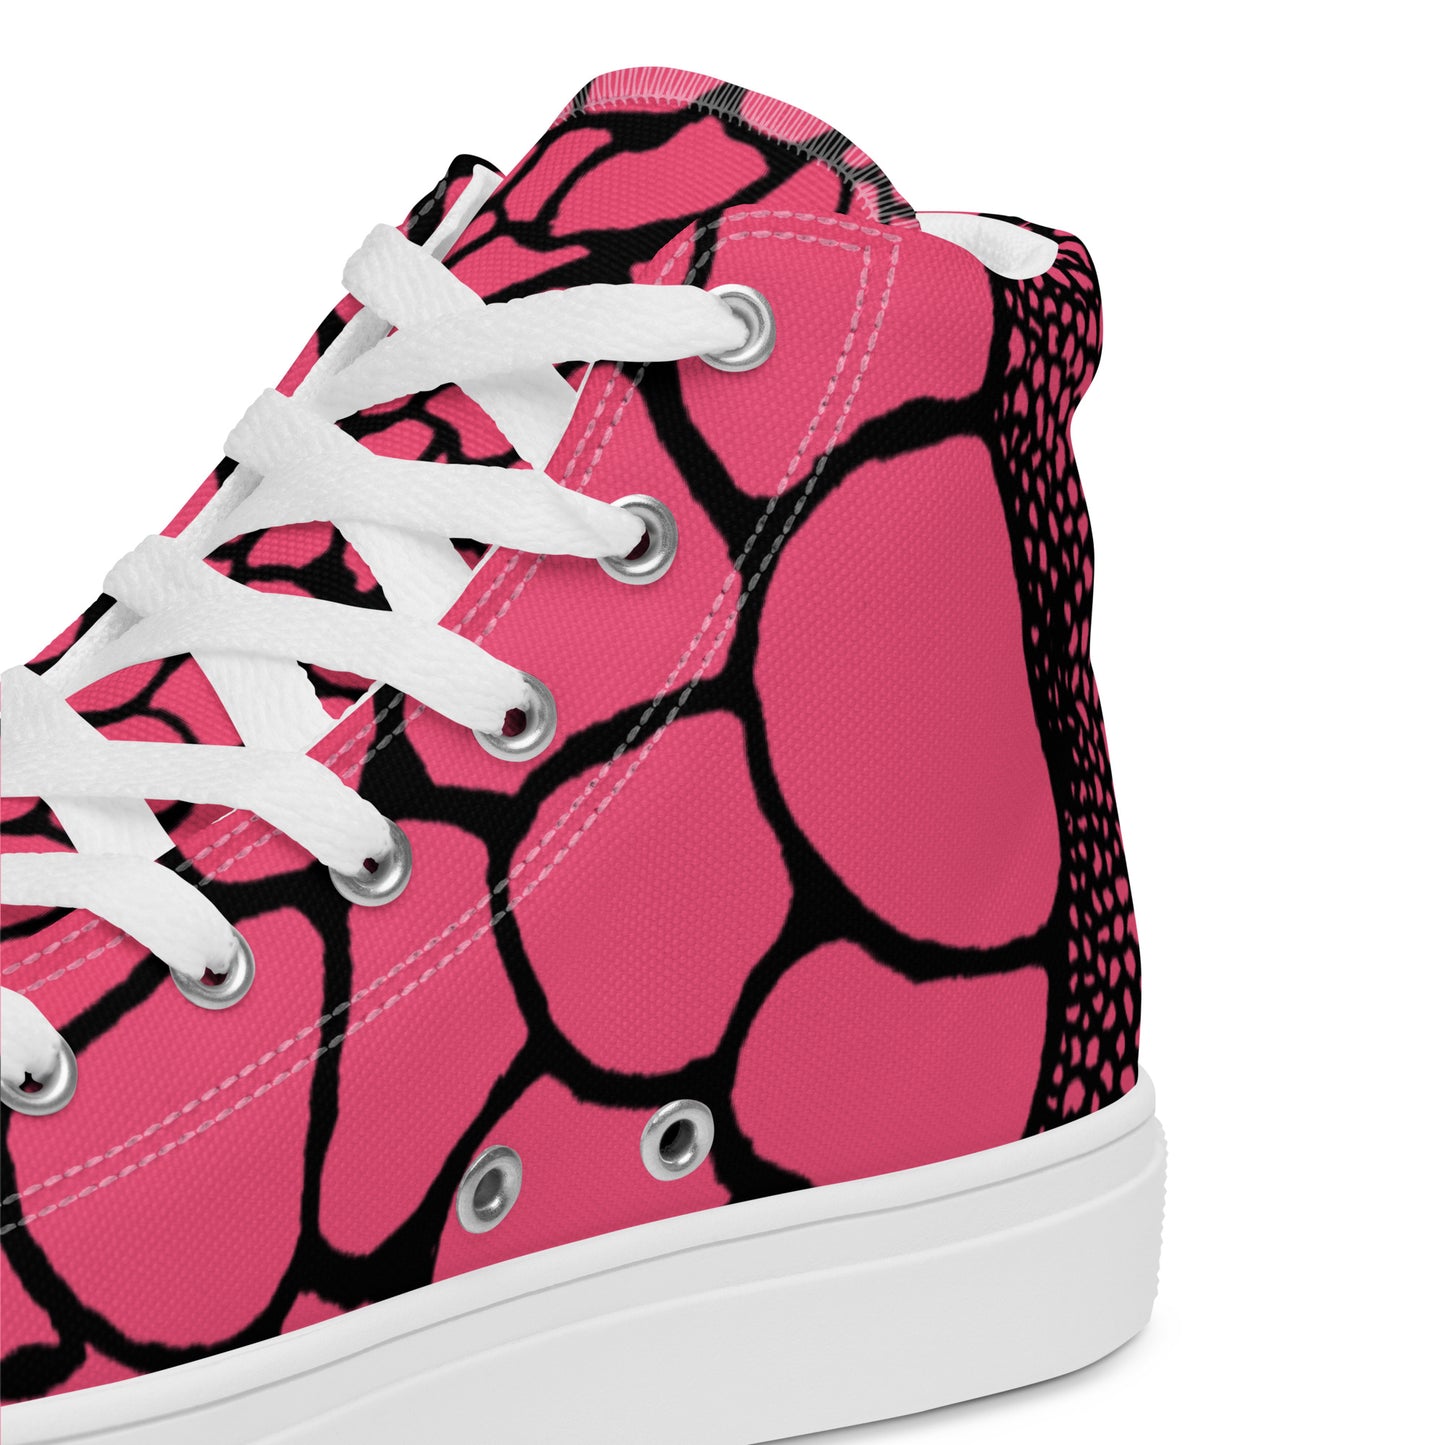 Organic Brink Pink Print Women’s High Top Canvas Shoes | Casual Print Shoes | Stylish Festival Sneakers | Abstract Shoes | Lace Up Sneakers | - Comfortable Culture - Shoes - Comfortable Culture